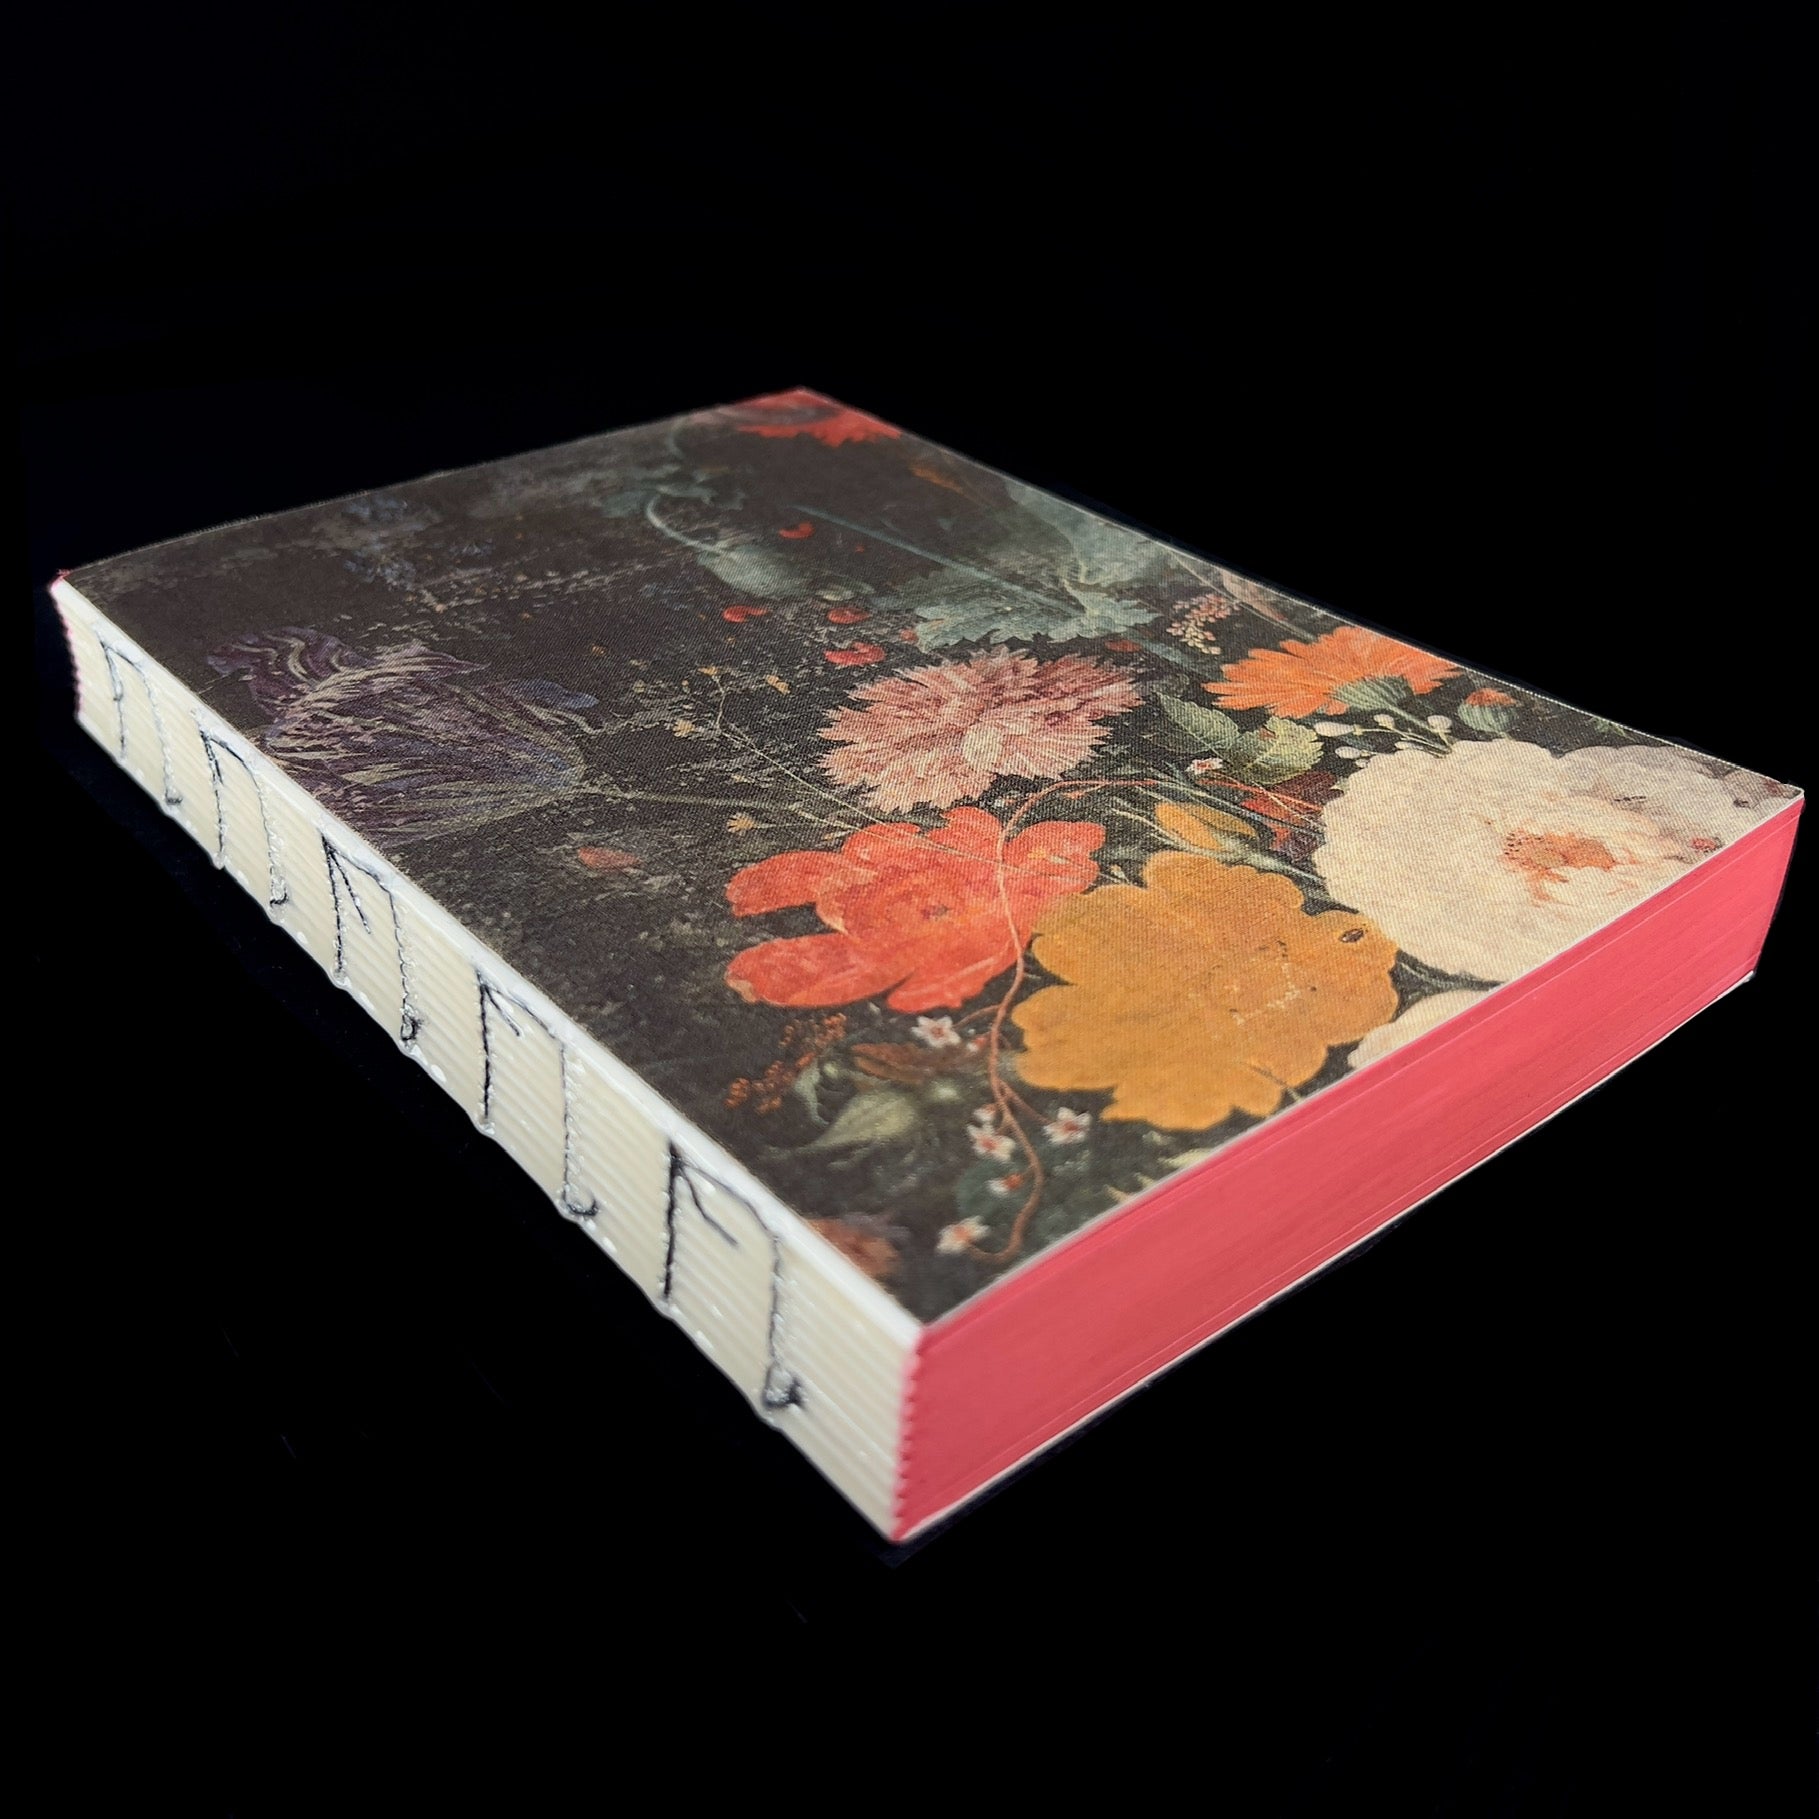 Side view of Floral Bouquet Journal with binding and red page boundaries